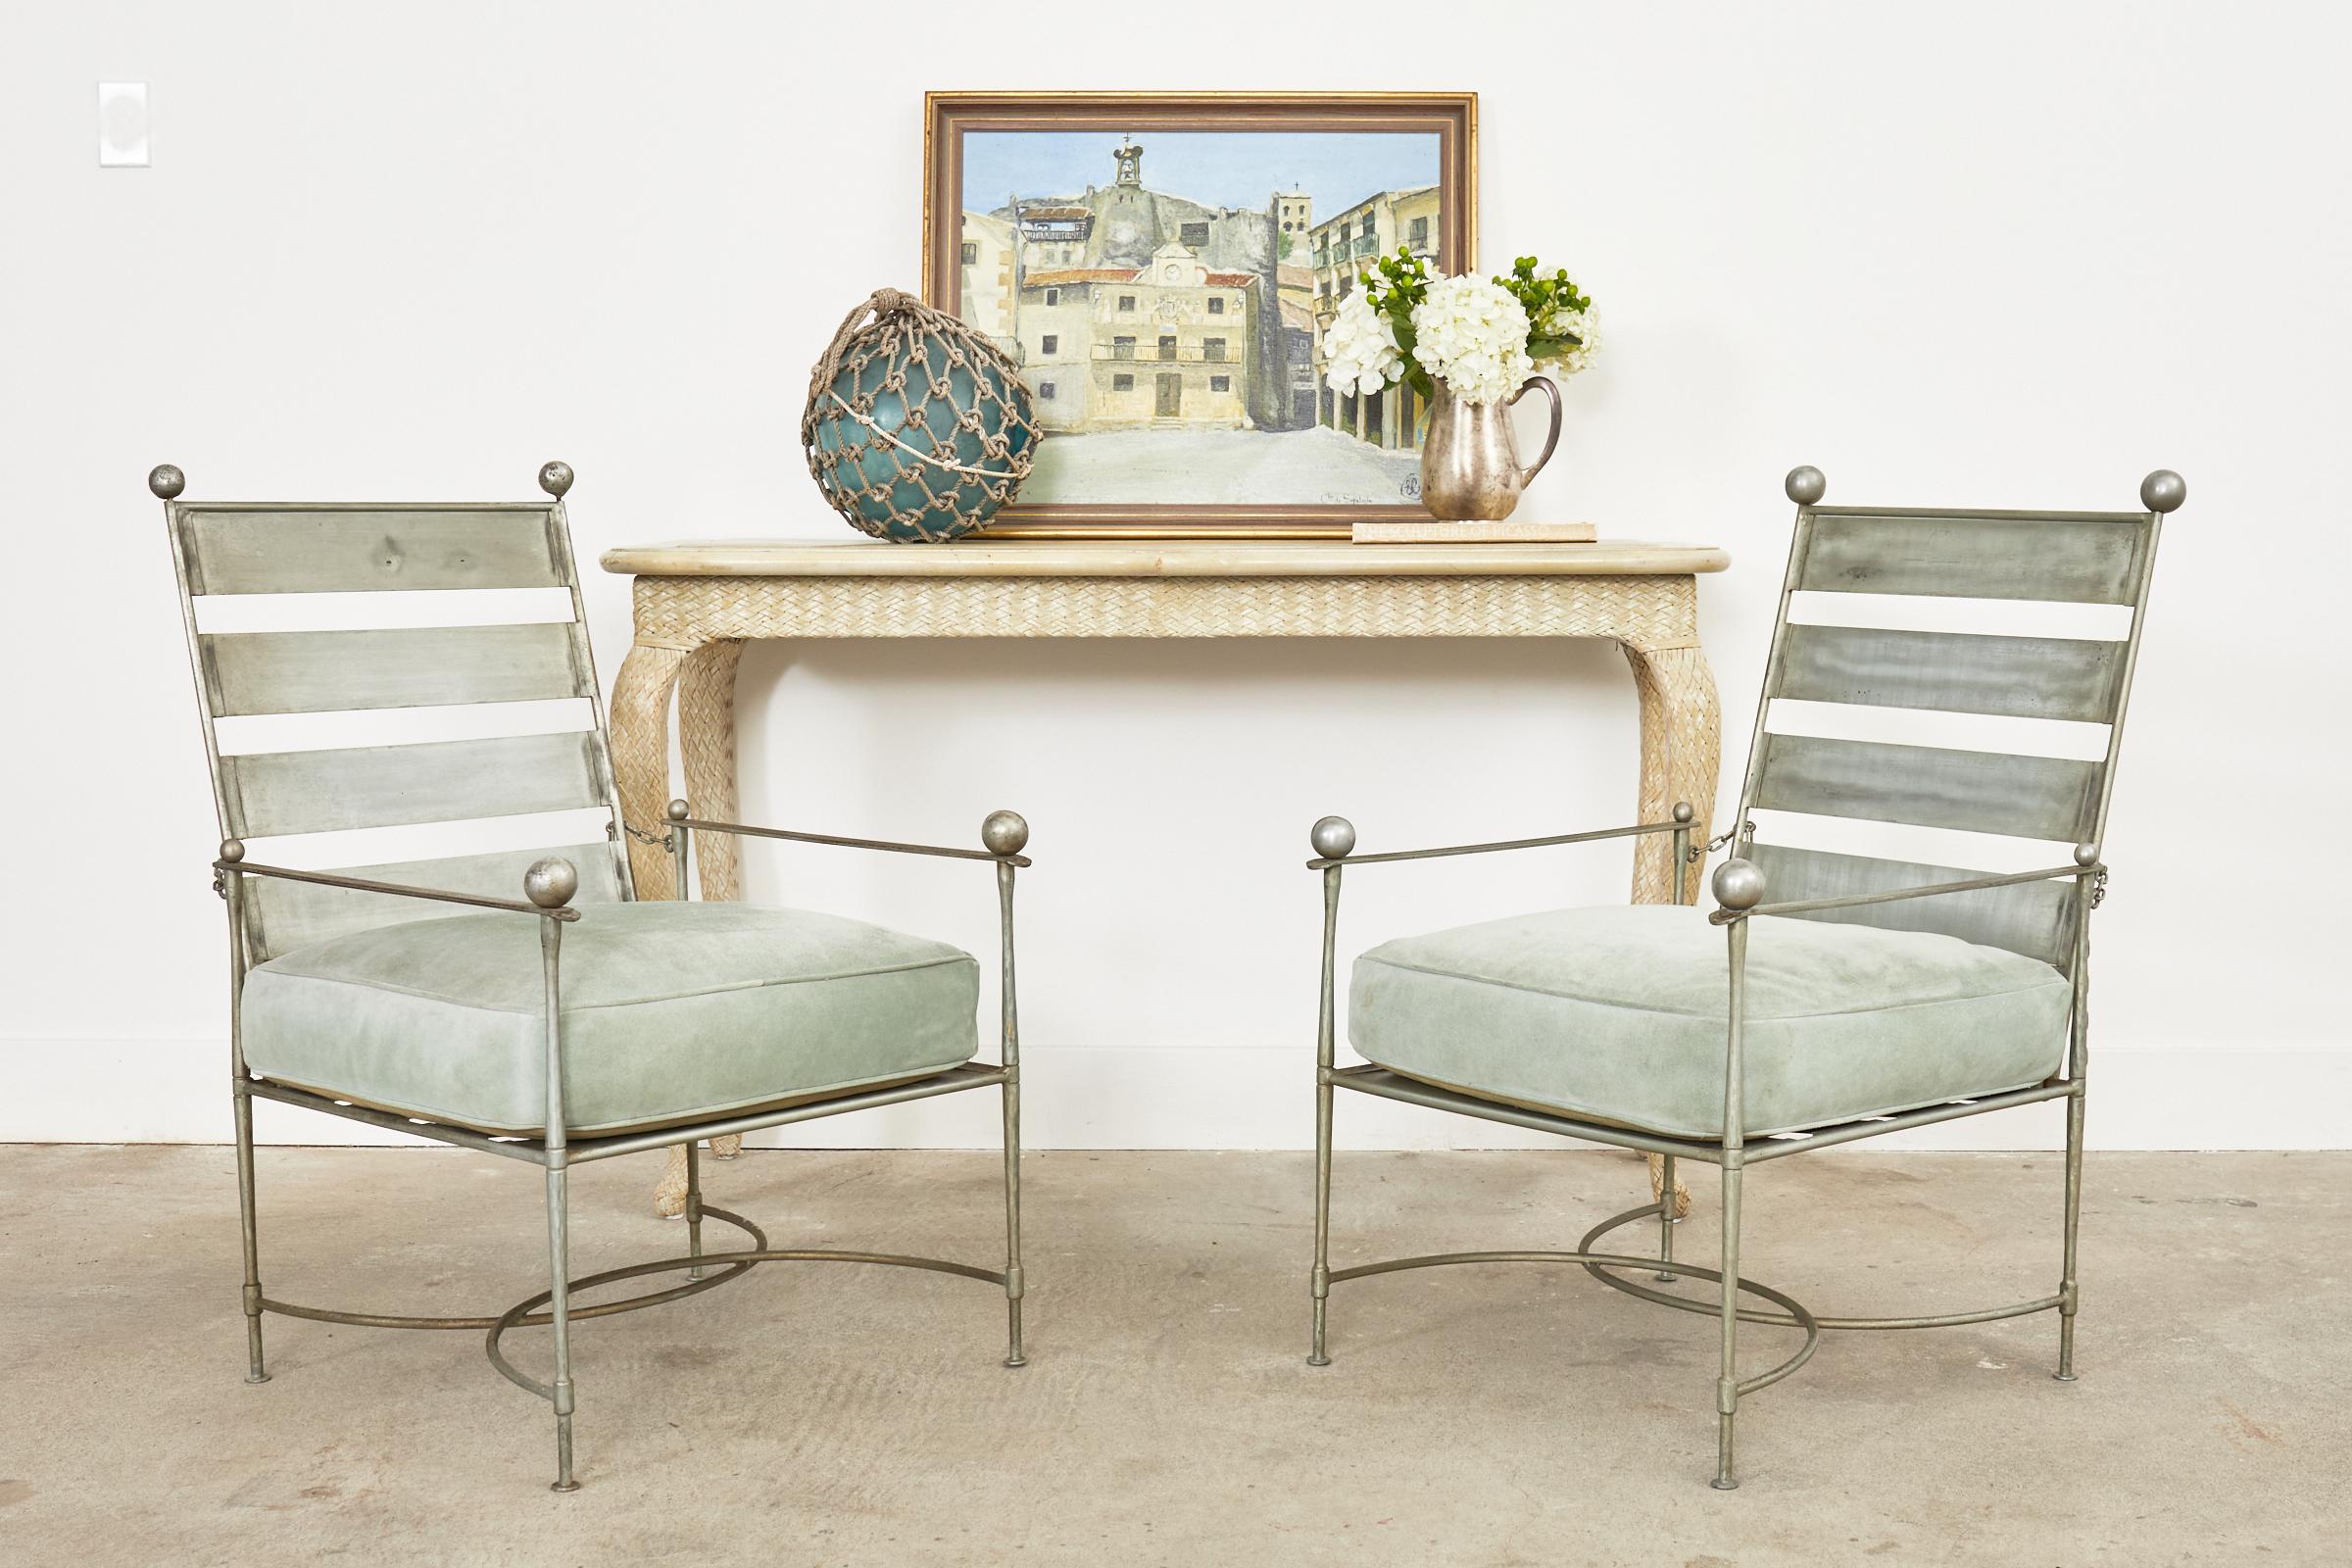 Rare pair of iconic reclining garden lounge chairs by Mario Papperzini for John Salterini. The mid-century modern chairs feature a gorgeous nickel finish with slat ladder back style supports. The generous seats are topped with thick cushions covered